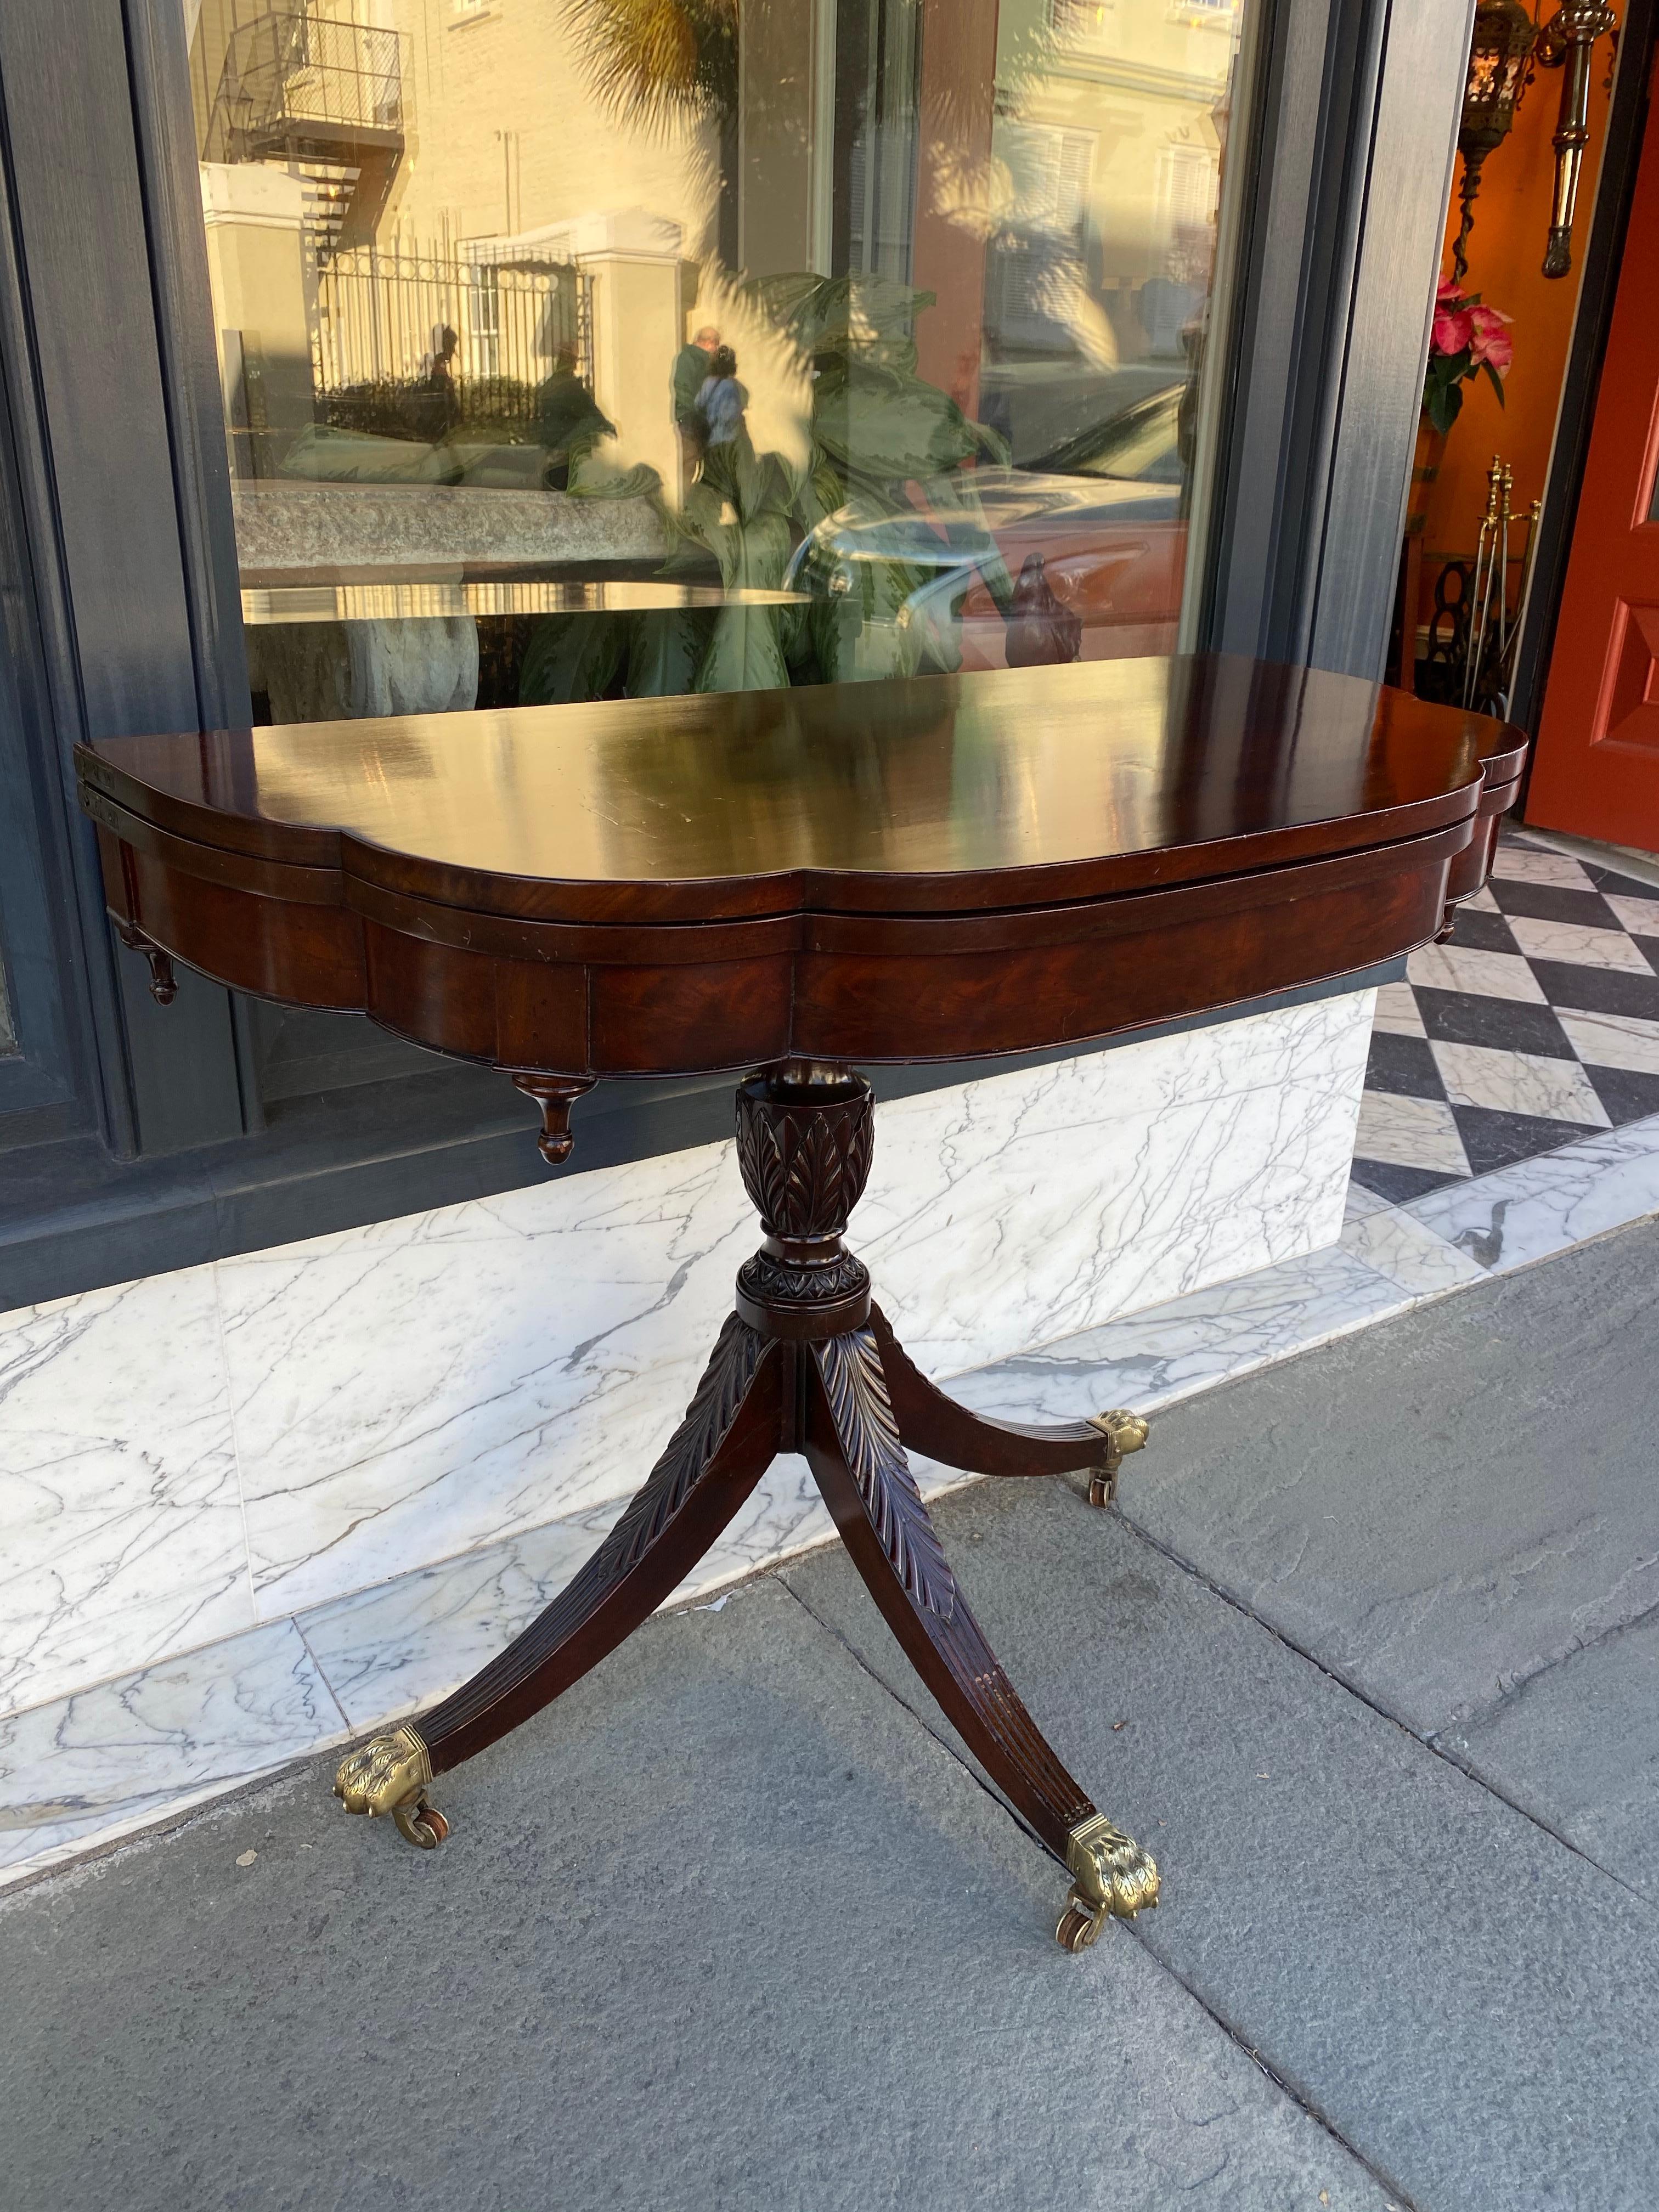 American trick leg card table with classically carved urn base, circa 1820, New York.